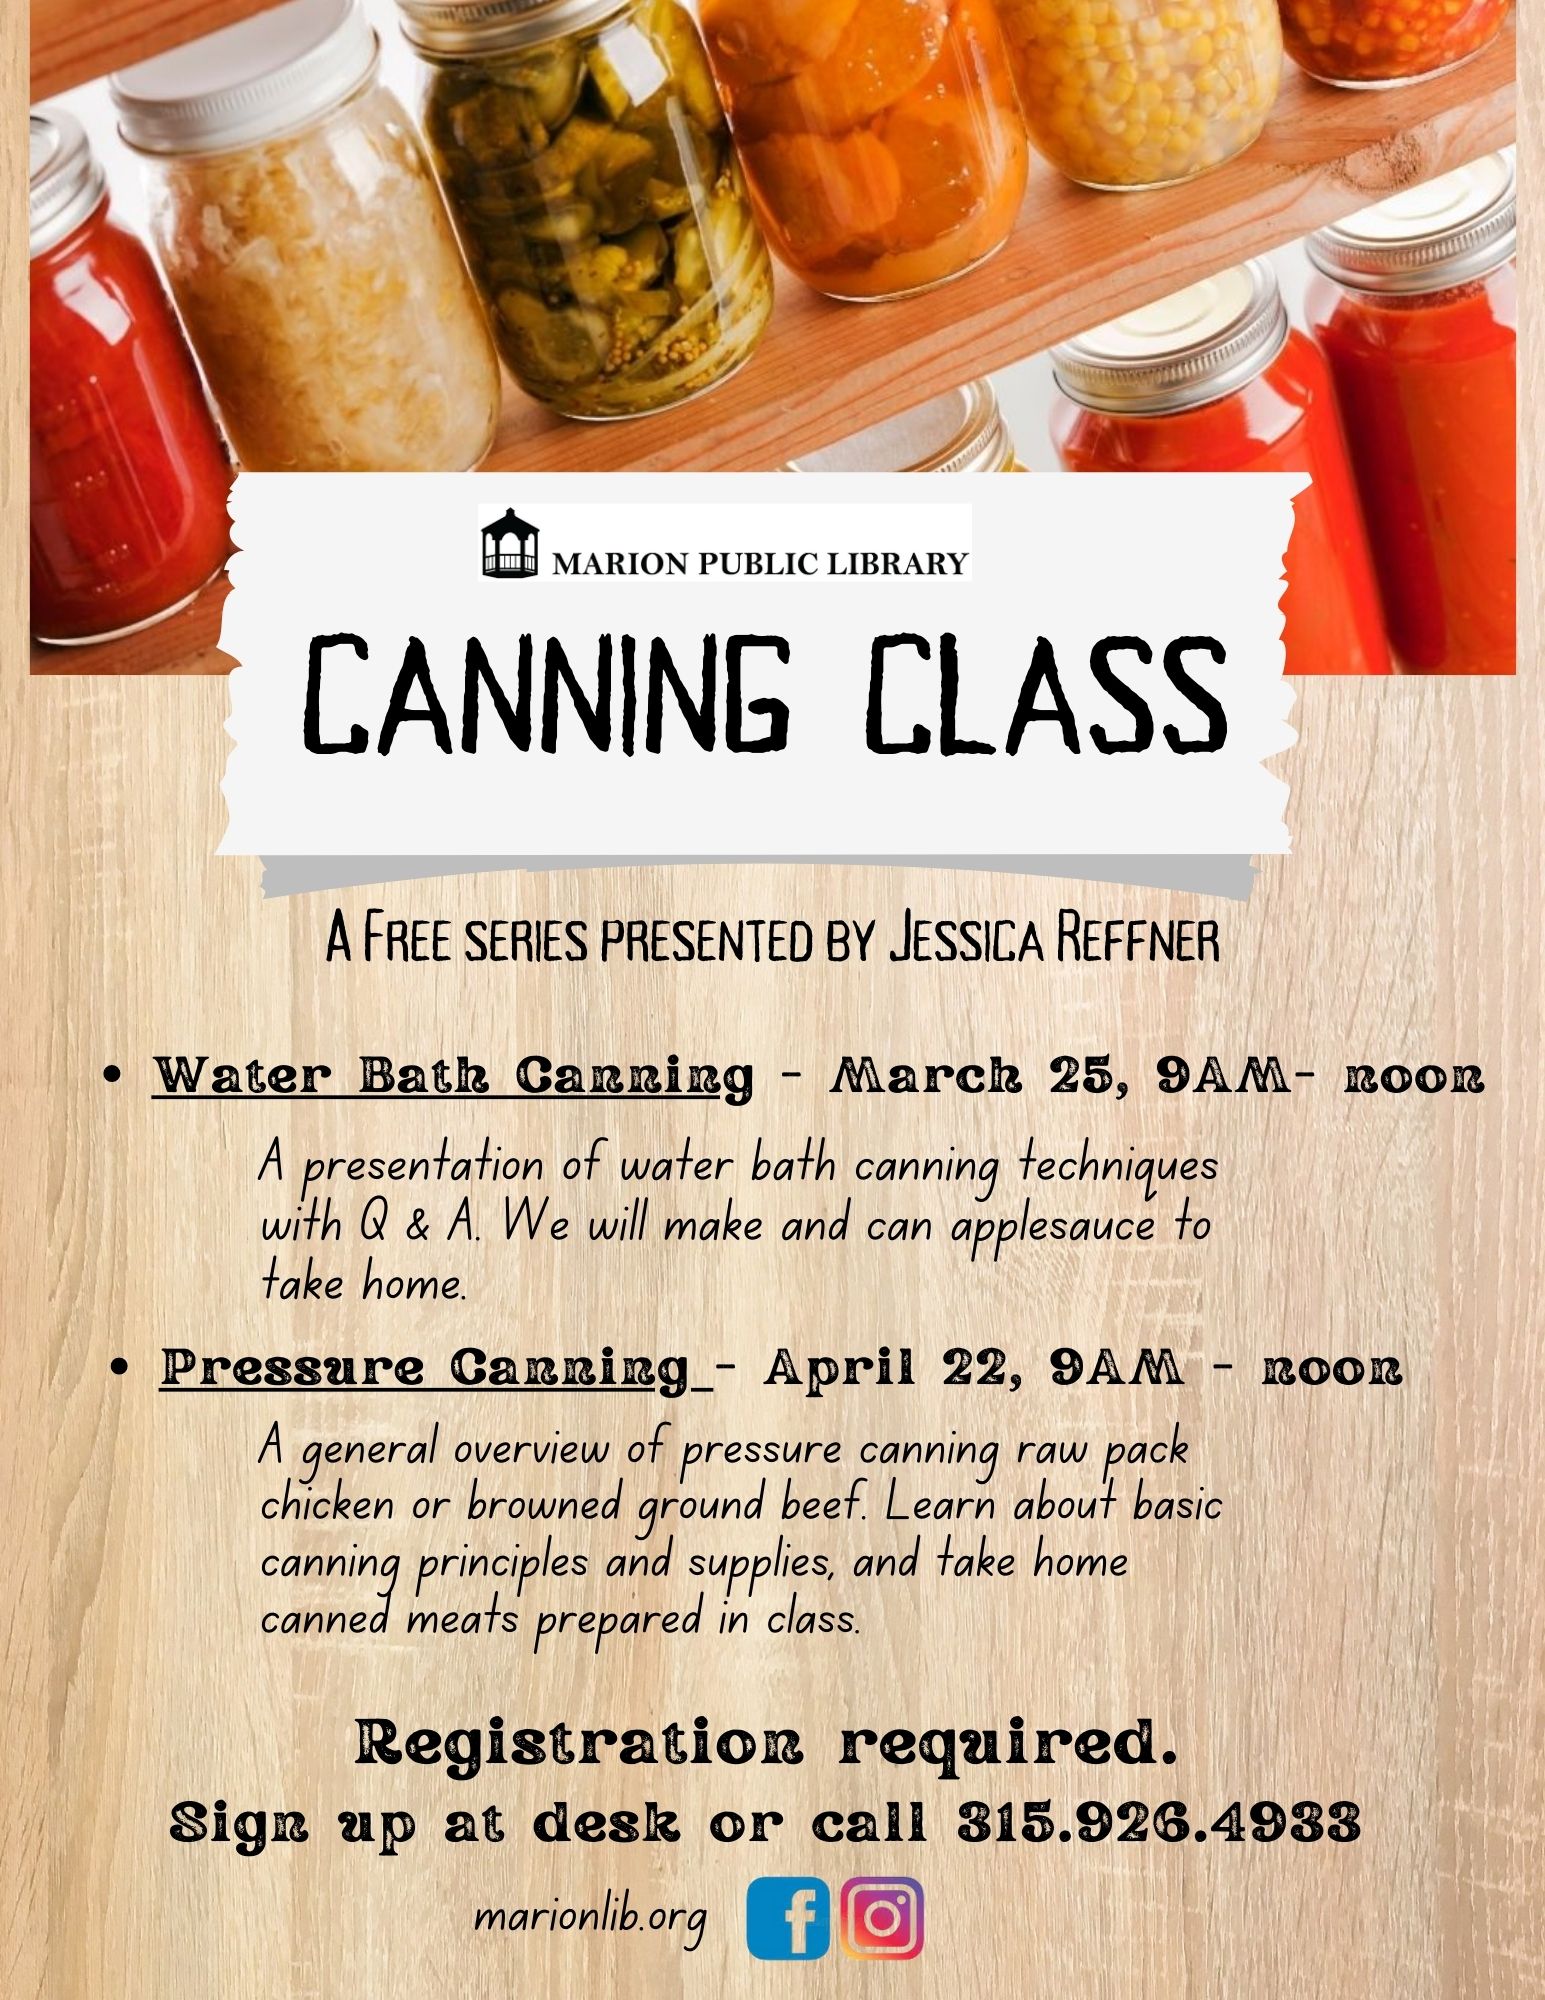 Principles of Pressure Canning